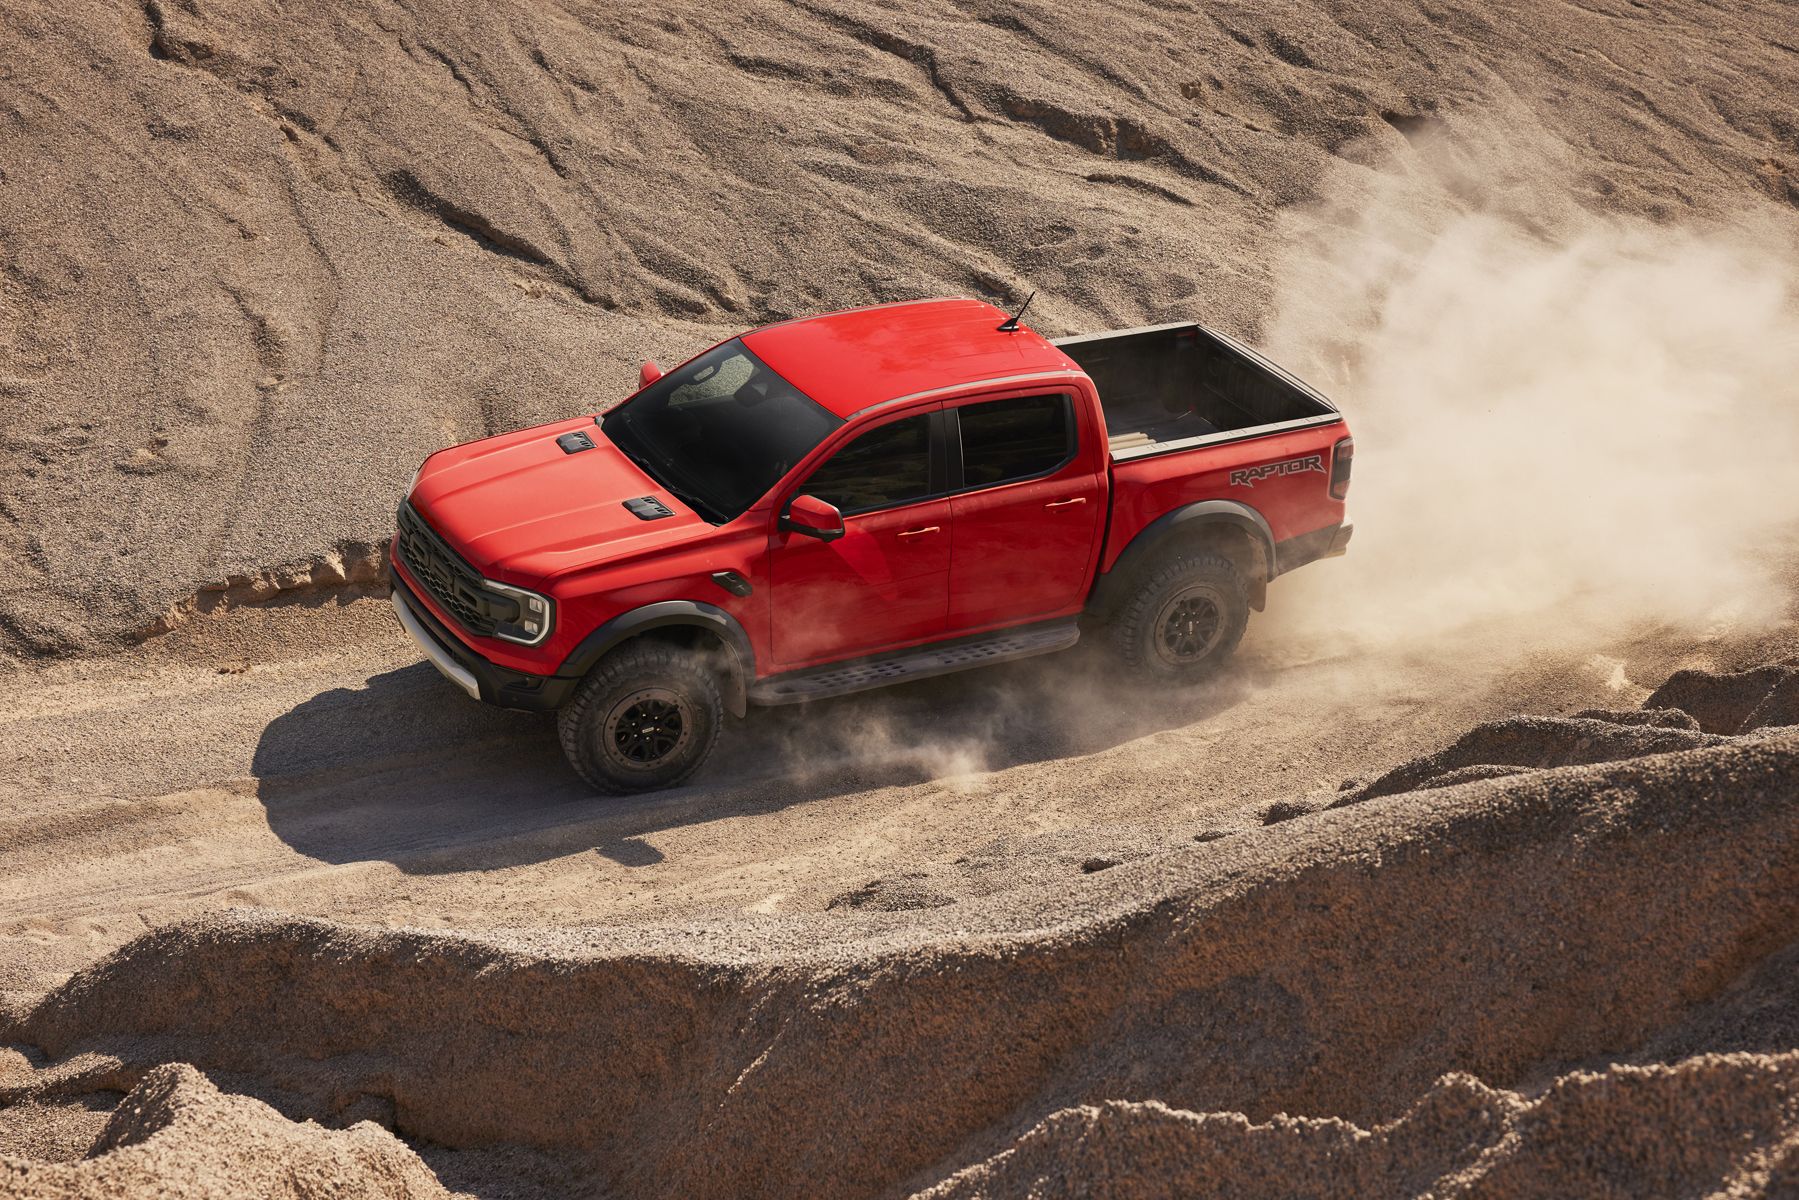 Next-Generation Ford Ranger Revealed, Previews 2023 Truck Coming to Canada